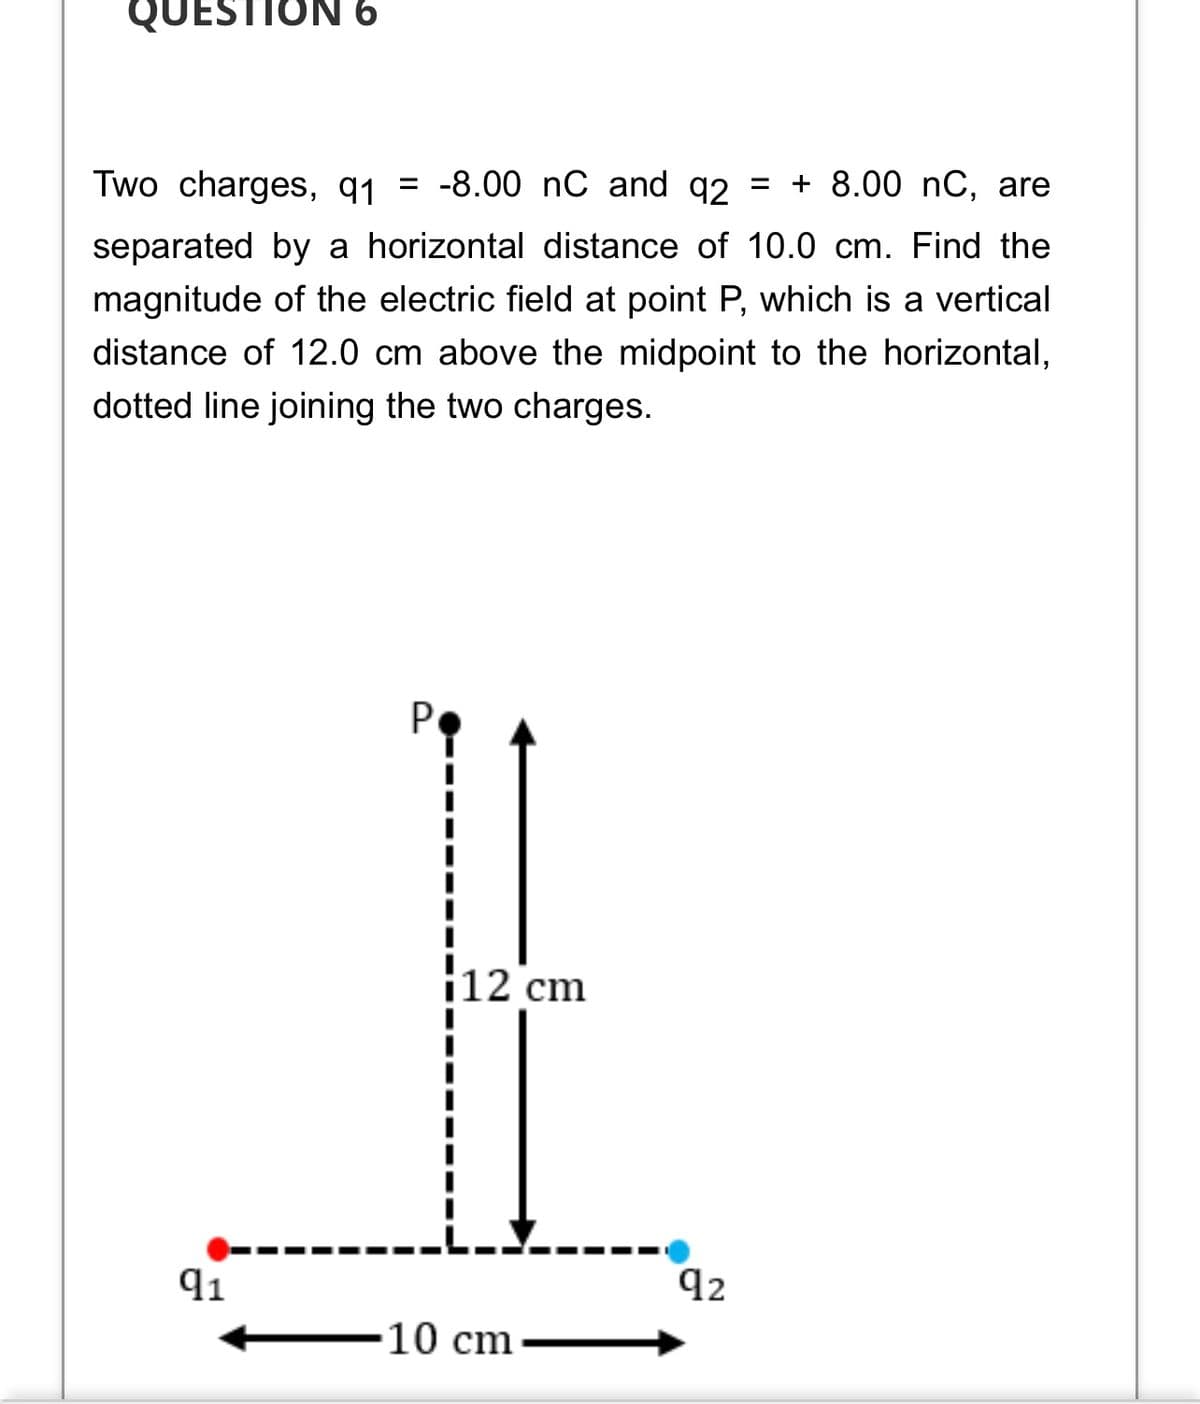 QUESTION 6
Two charges, q1 = -8.00 nC and q2 =
+ 8.00 nC, are
separated by a horizontal distance of 10.0 cm. Find the
magnitude of the electric field at point P, which is a vertical
distance of 12.0 cm above the midpoint to the horizontal,
dotted line joining the two charges.
P
12 cm
91
q2
10 cm
